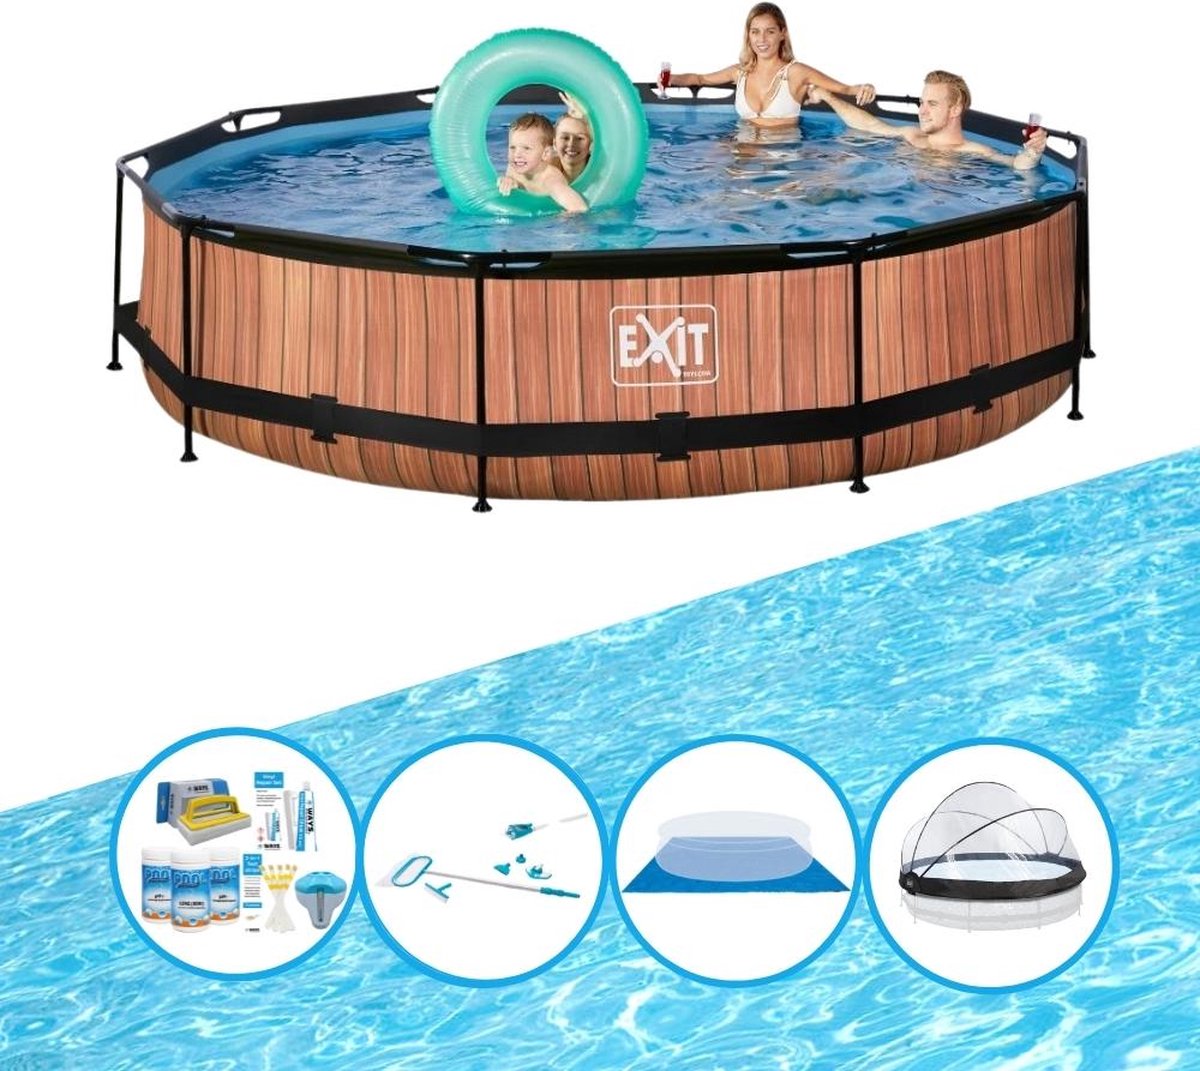 EXIT Zwembad Timber Style - ø360x76 cm - Frame Pool - Compleet zwembadpakket